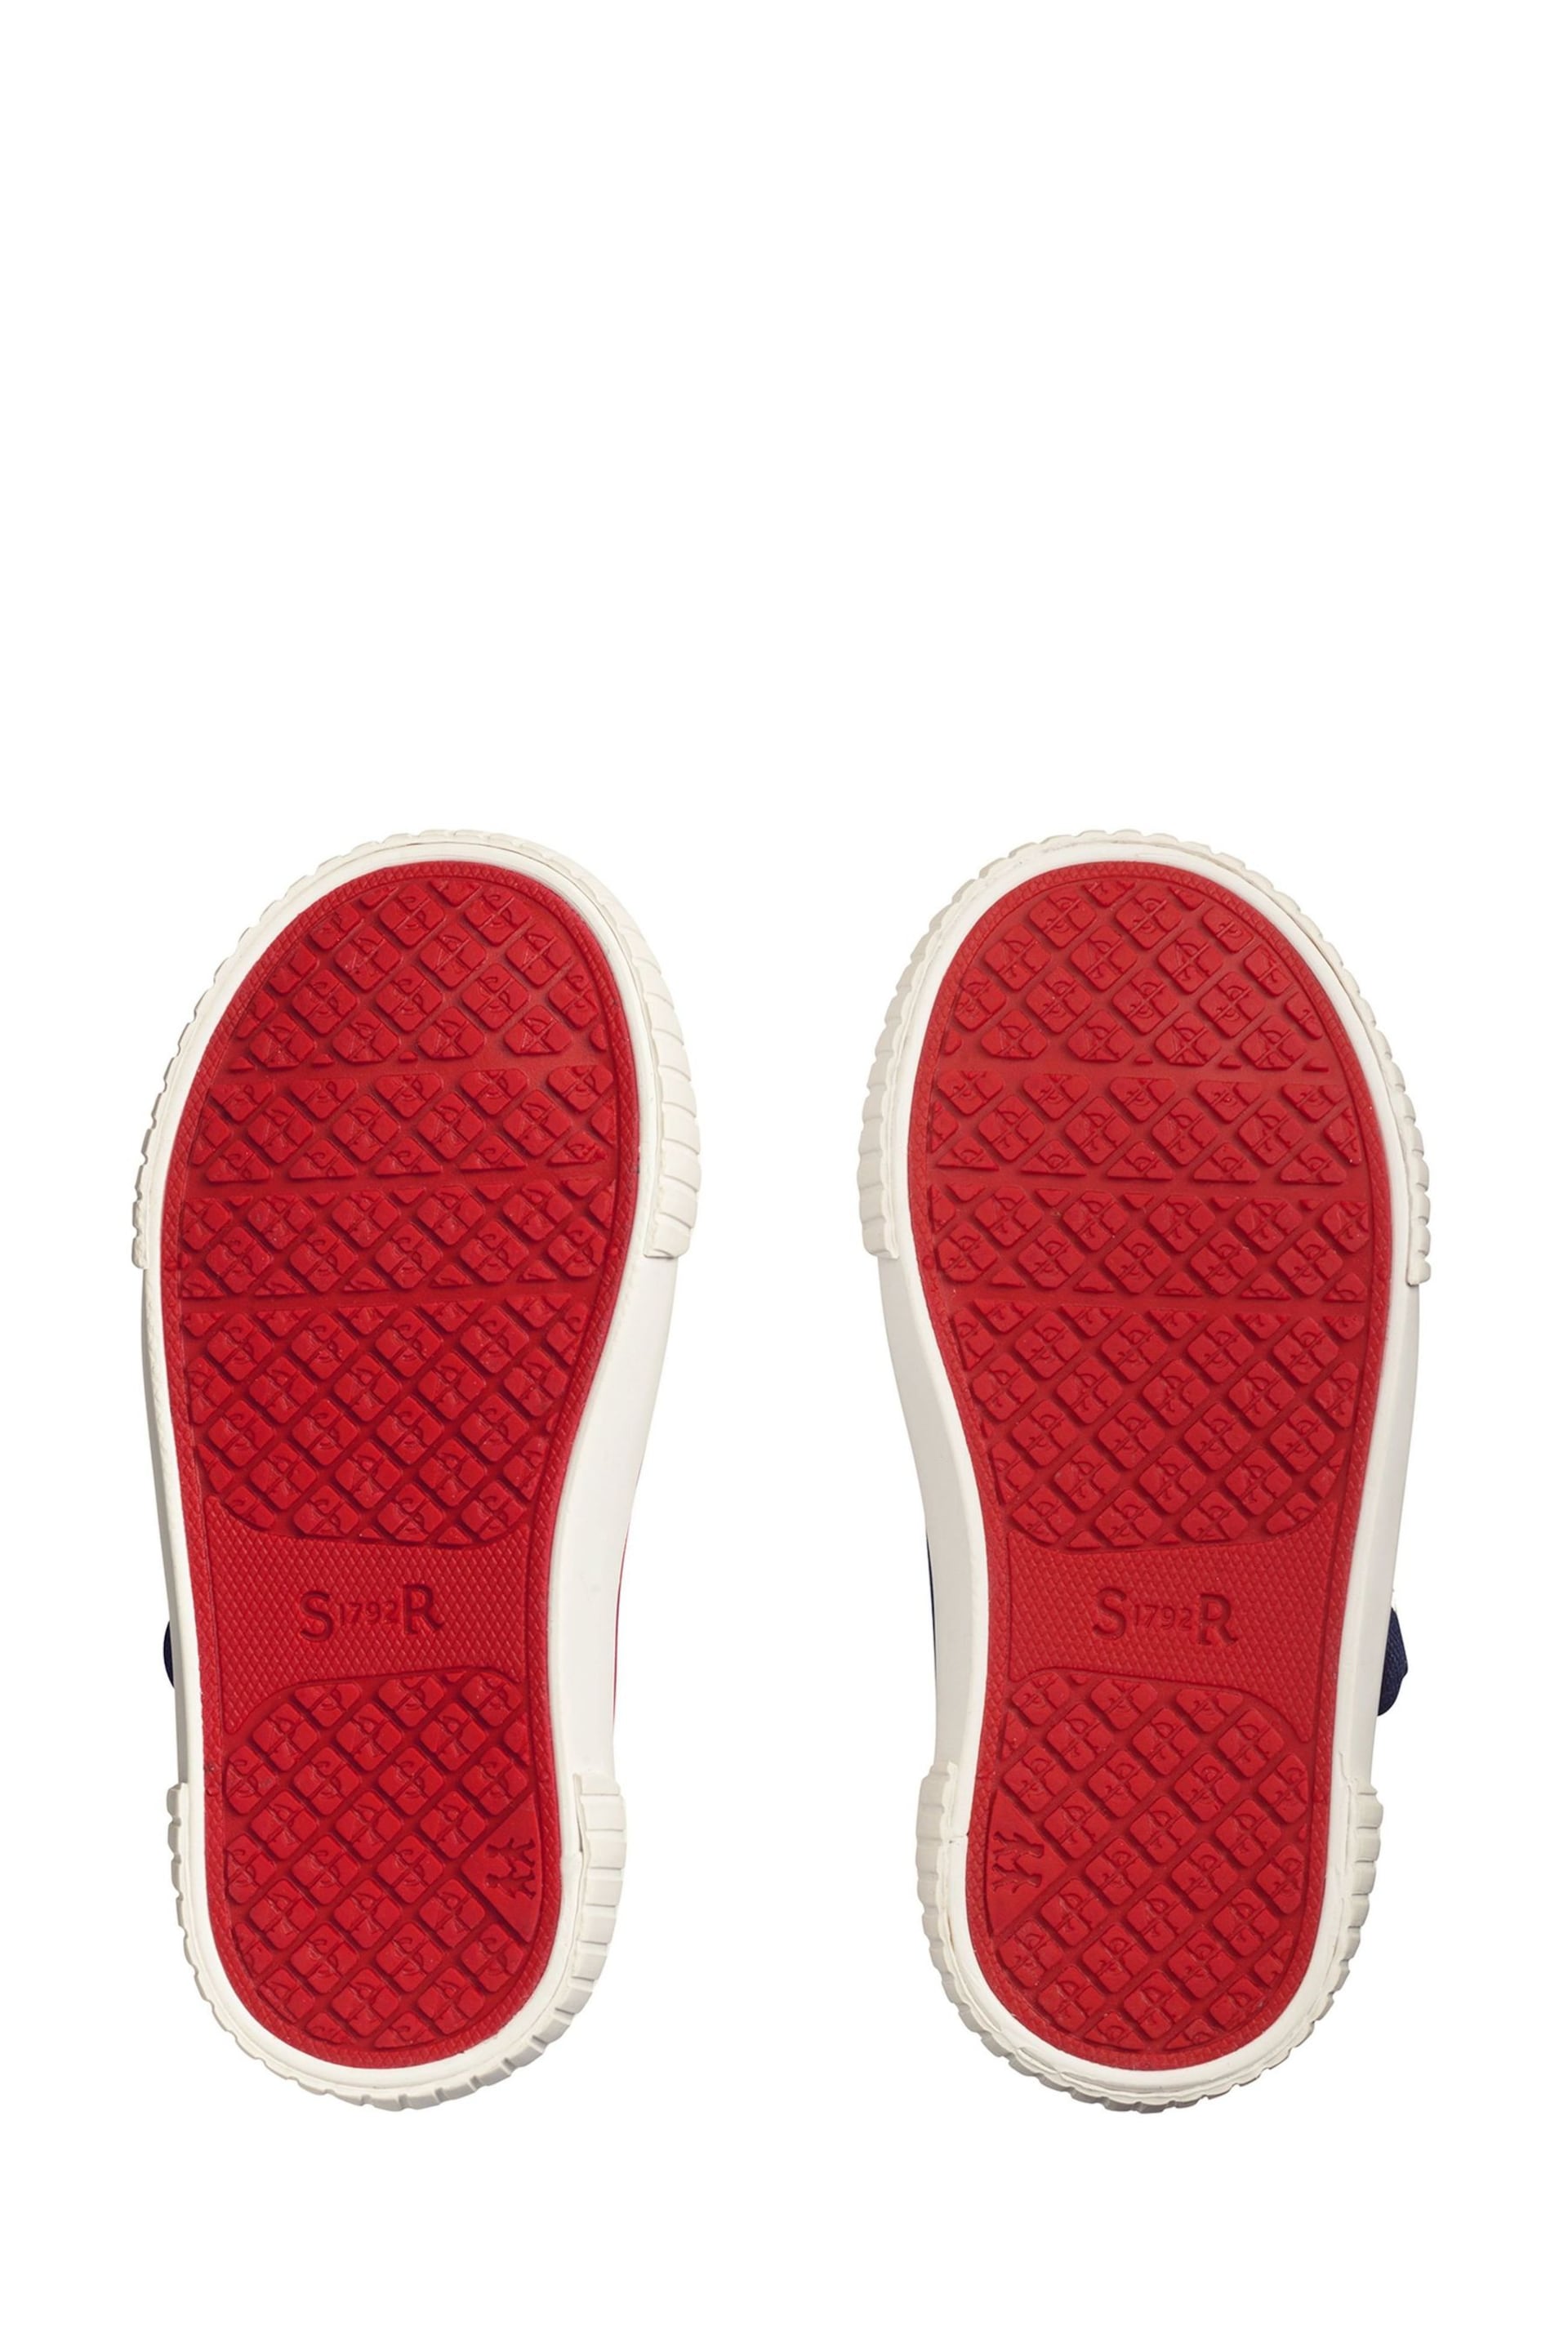 Start Rite Blue Anchor Washable Canvas T-Bar Summer Shoes - Image 6 of 6